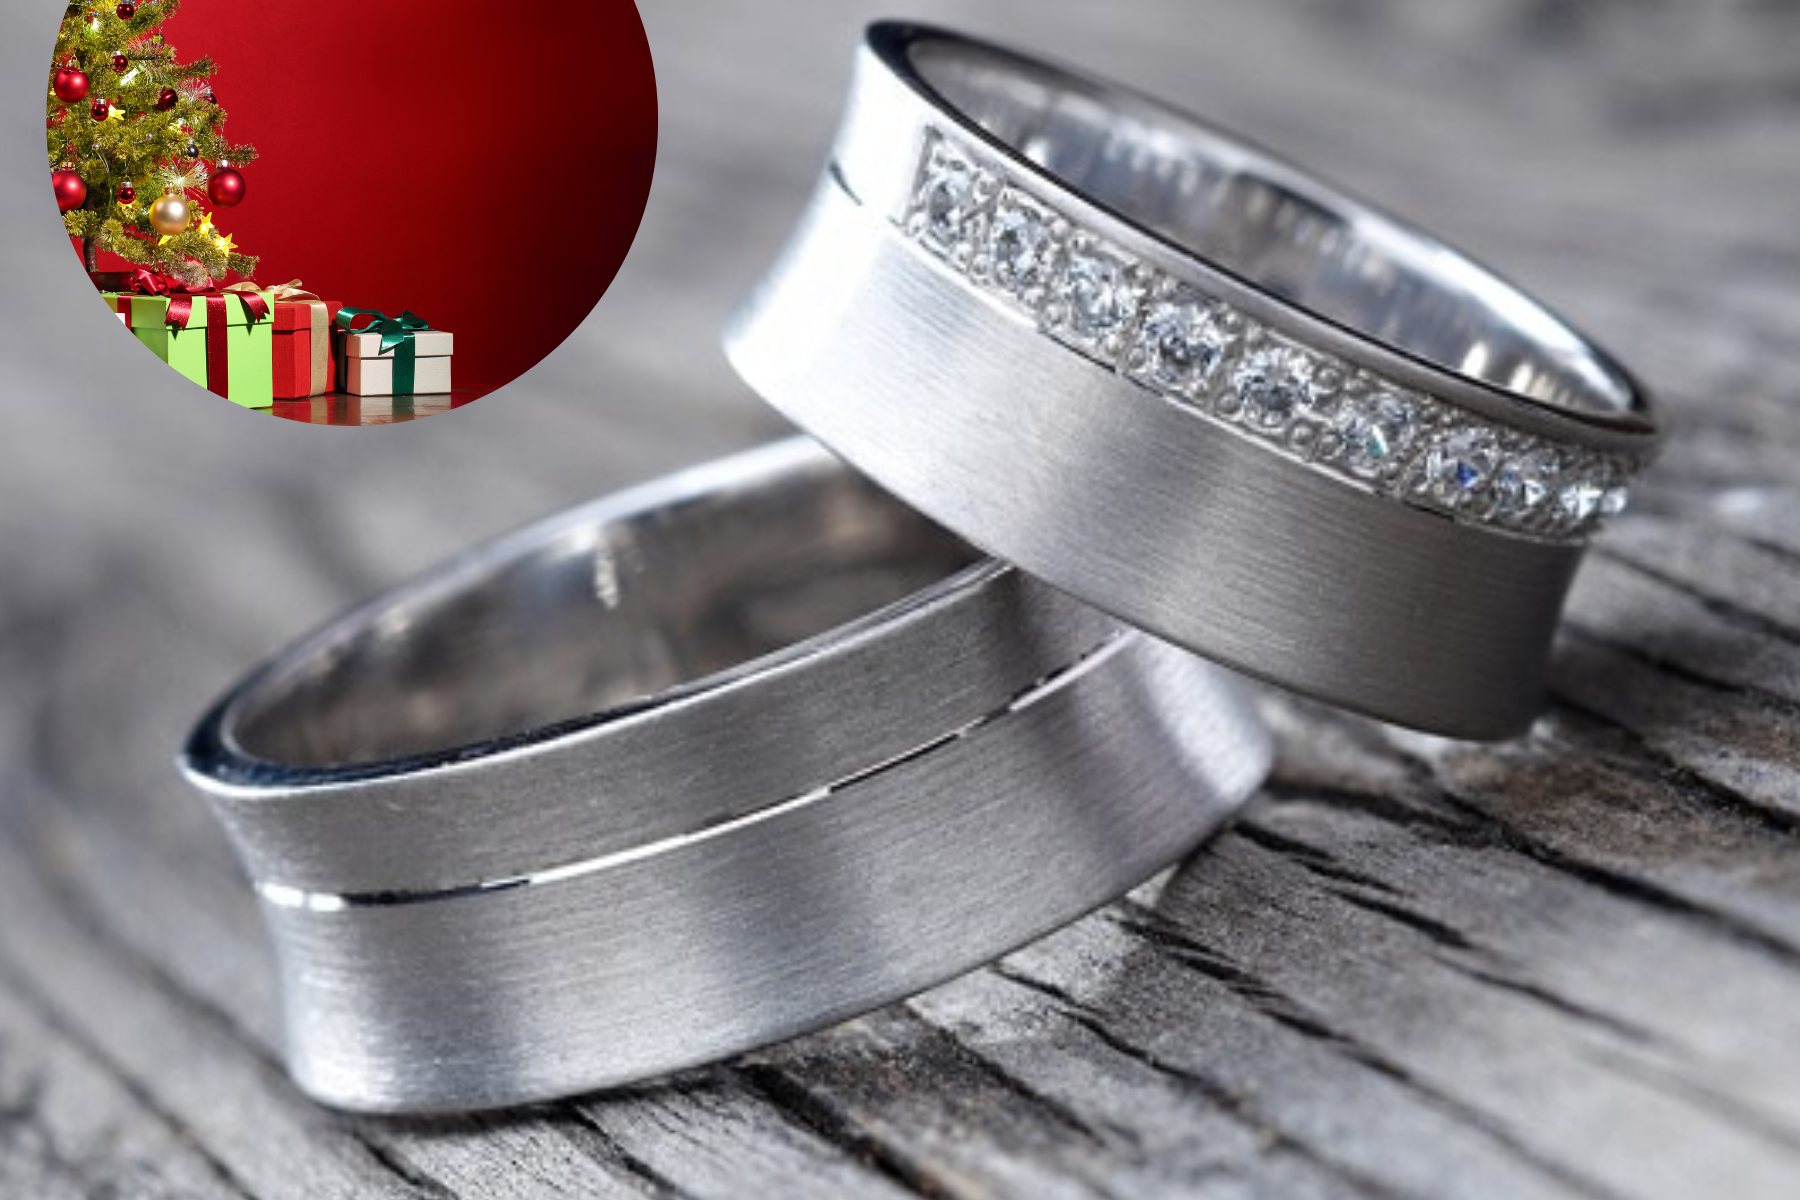 A pair of platinum rings adorned with a Christmas tree and presented in a gift box